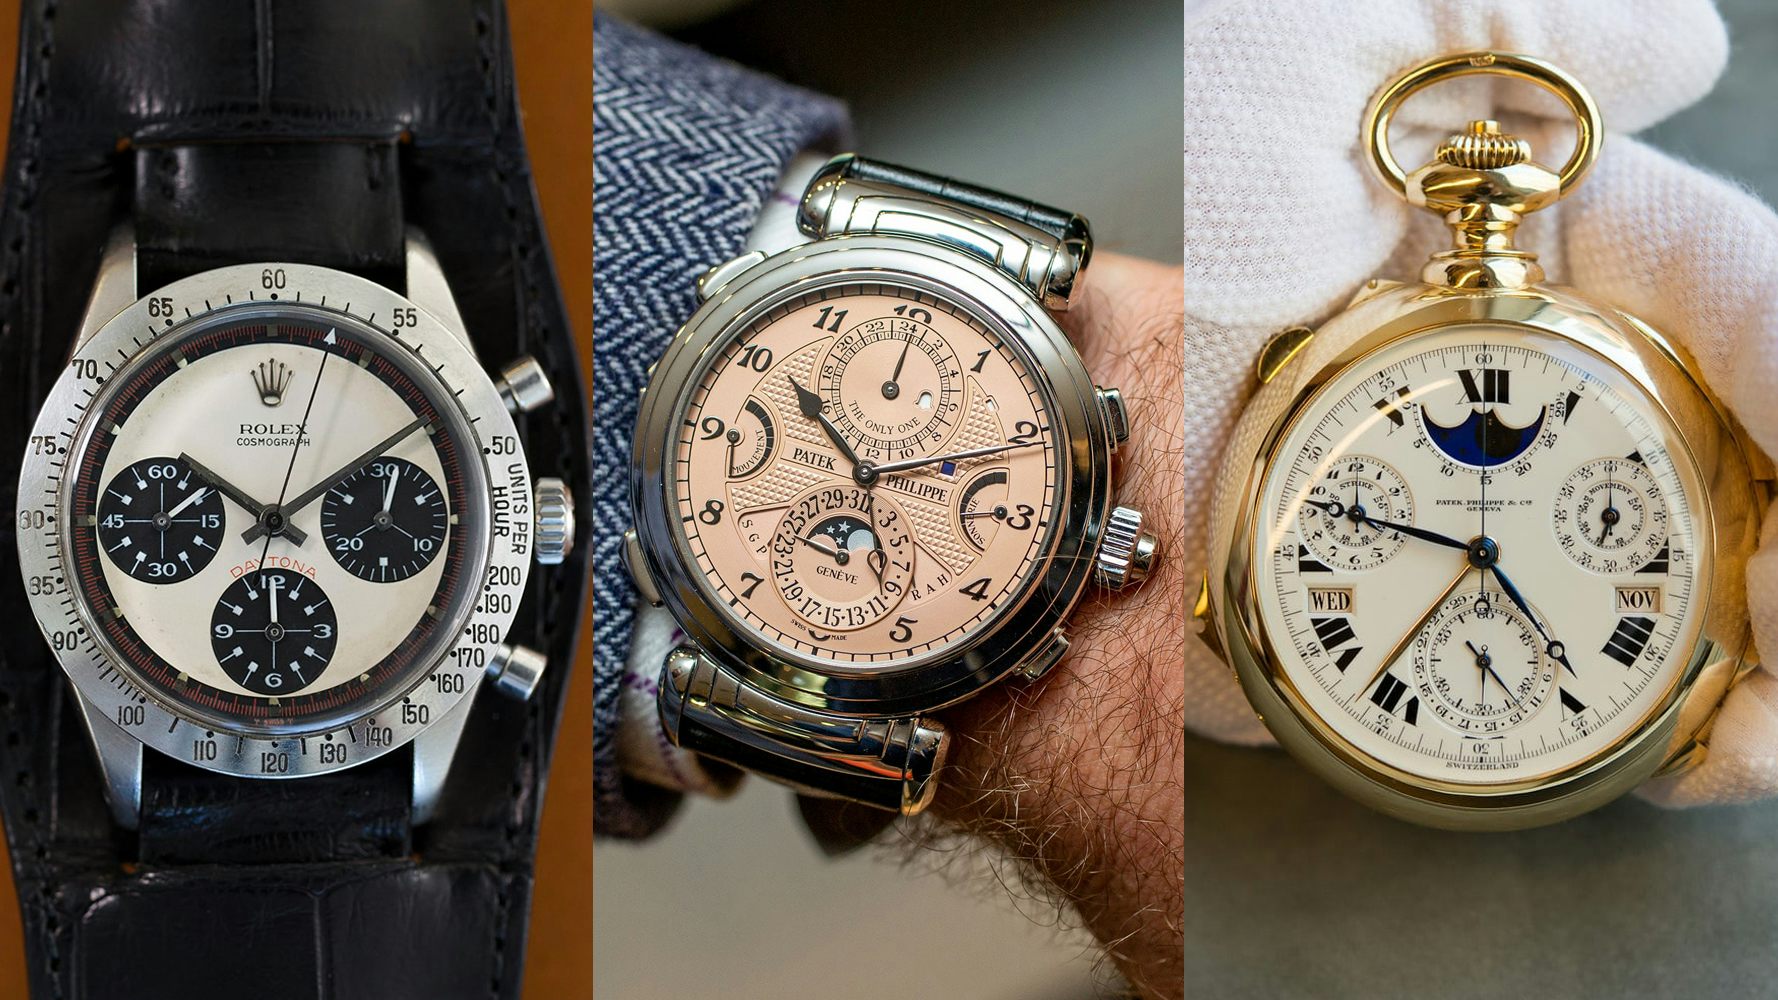 These Are the Most Expensive Watches Ever Produced